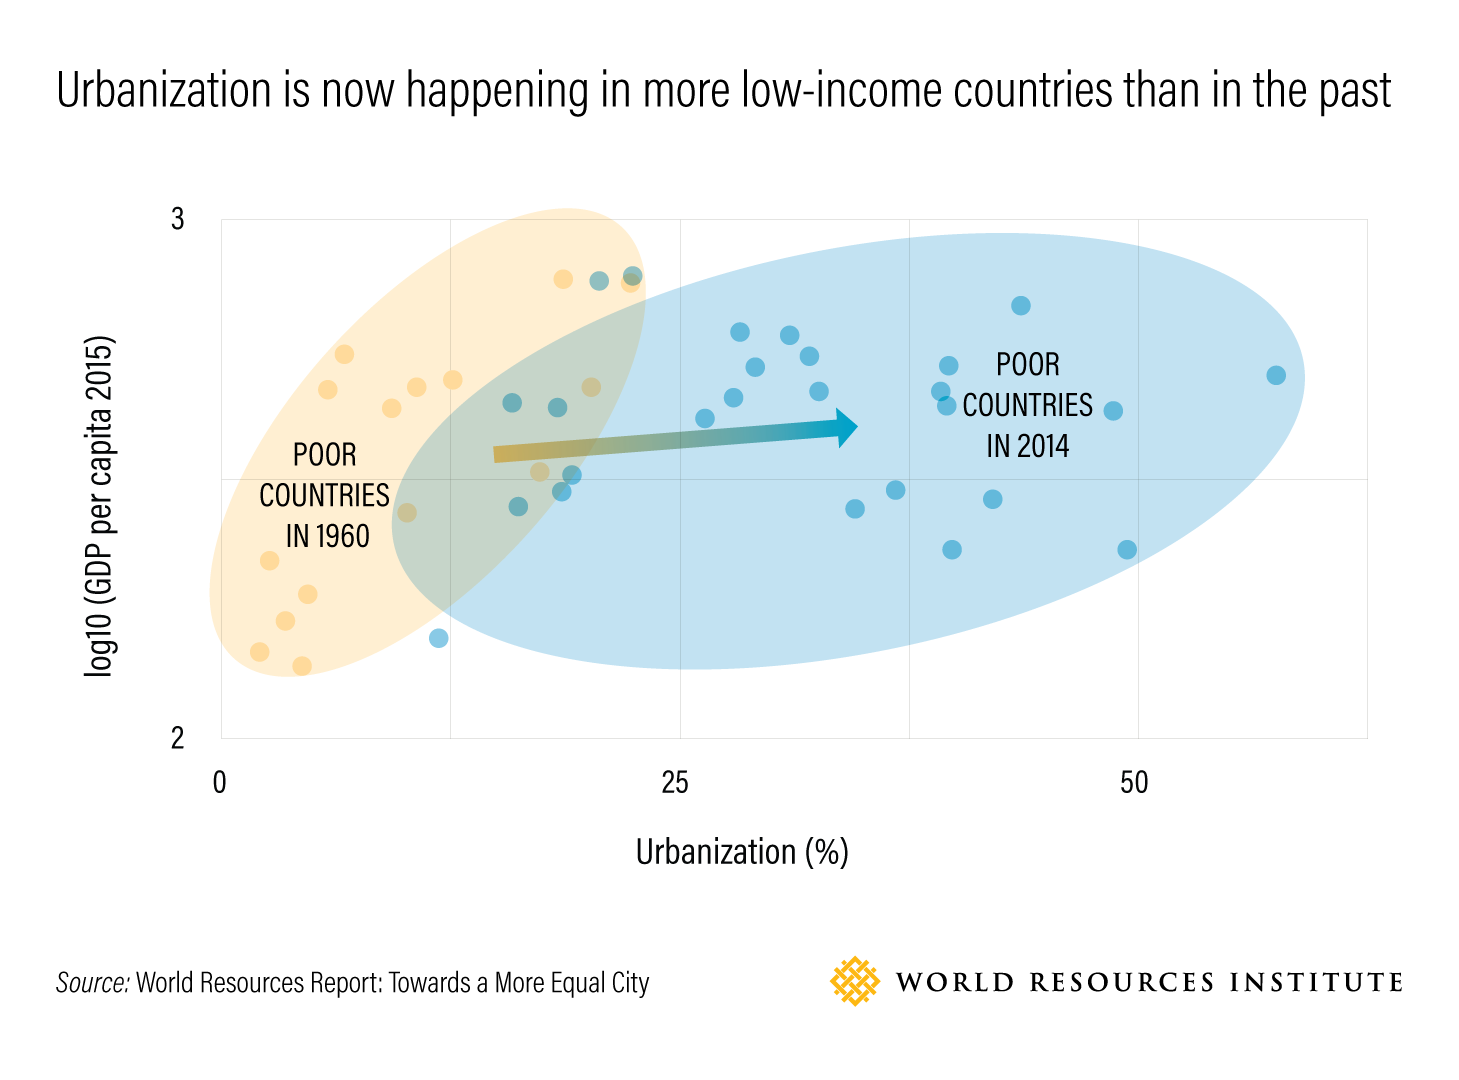 Urbanization is now happening in more low-income countries than in the past